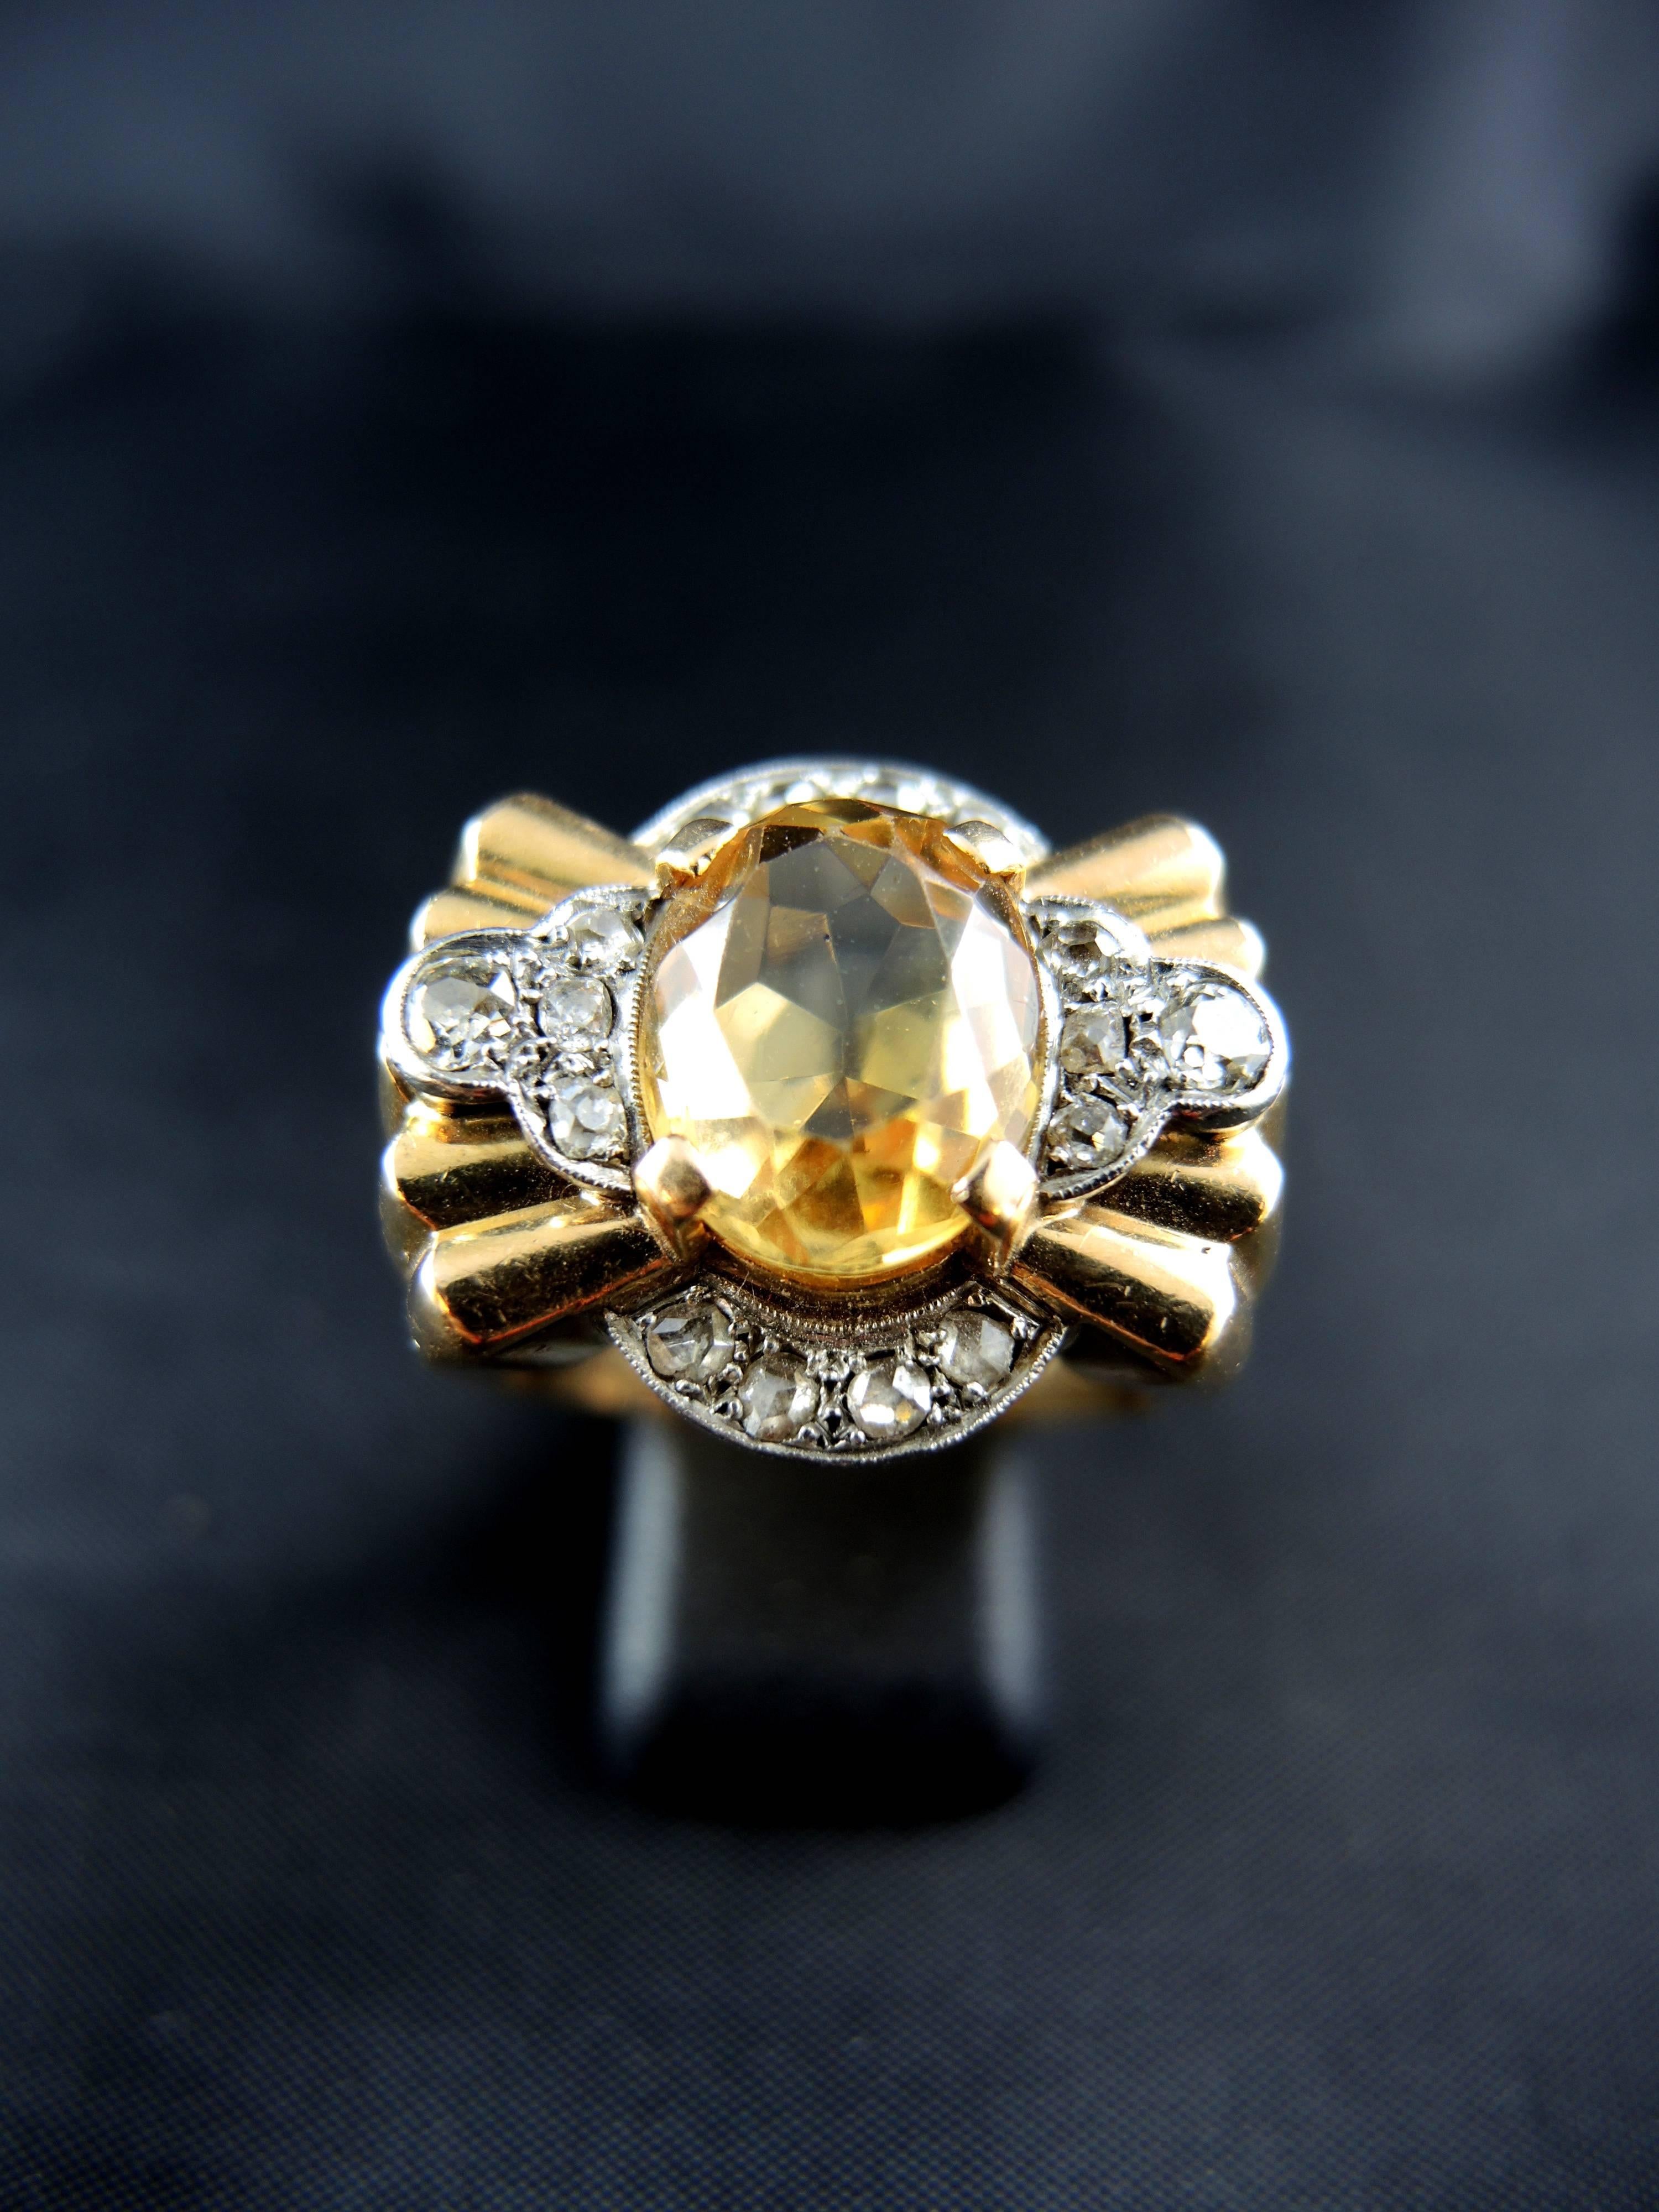 18kt yellow gold and platinium Tank ring (quality mark: owl and mascaron) set with a central citrin (weighting apx 4,40 Cts) old and rose cut diamonds (total weight estimated around 0,60 Ct).

Work from the 40ies.

Weight: 21,60 g
Ring size: 64